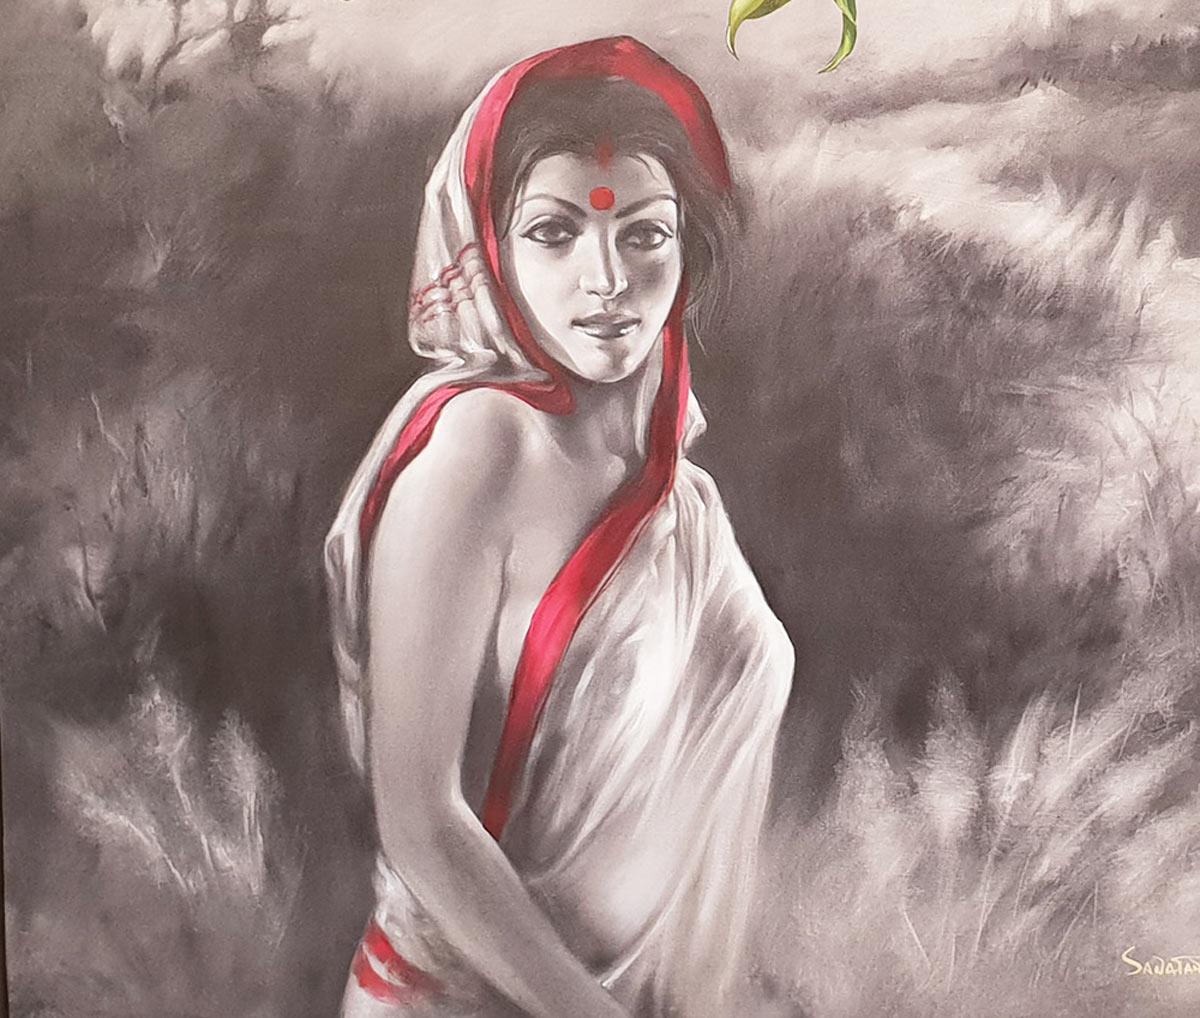 LADY 01, Indian, Red, White Sari, Acrylic Painting by Indian Artist 